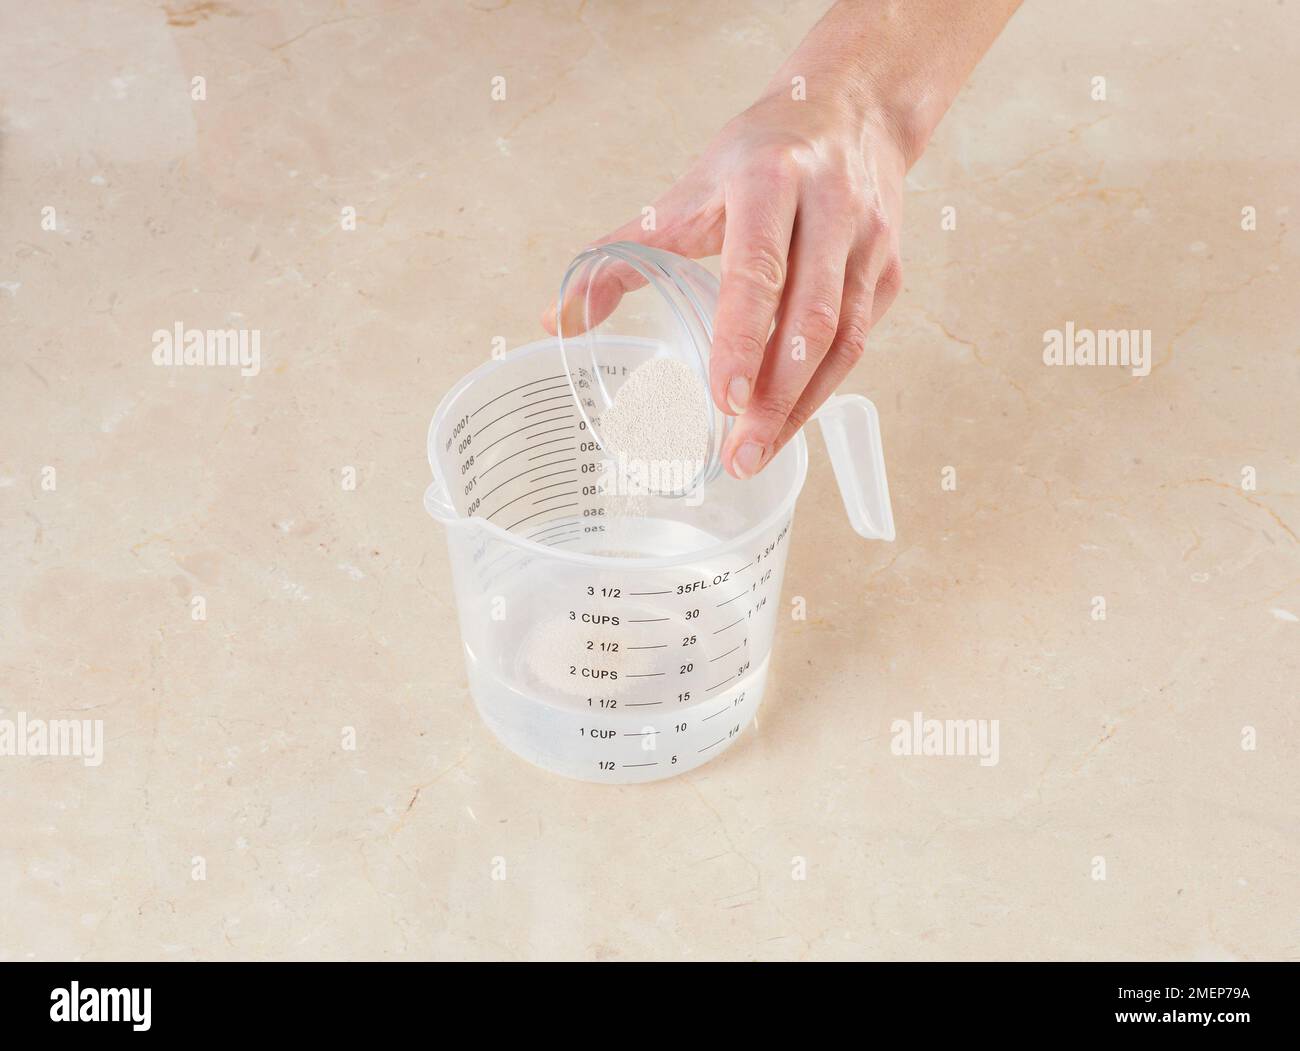 Emptying dry yeast into measuring jug containing water Stock Photo